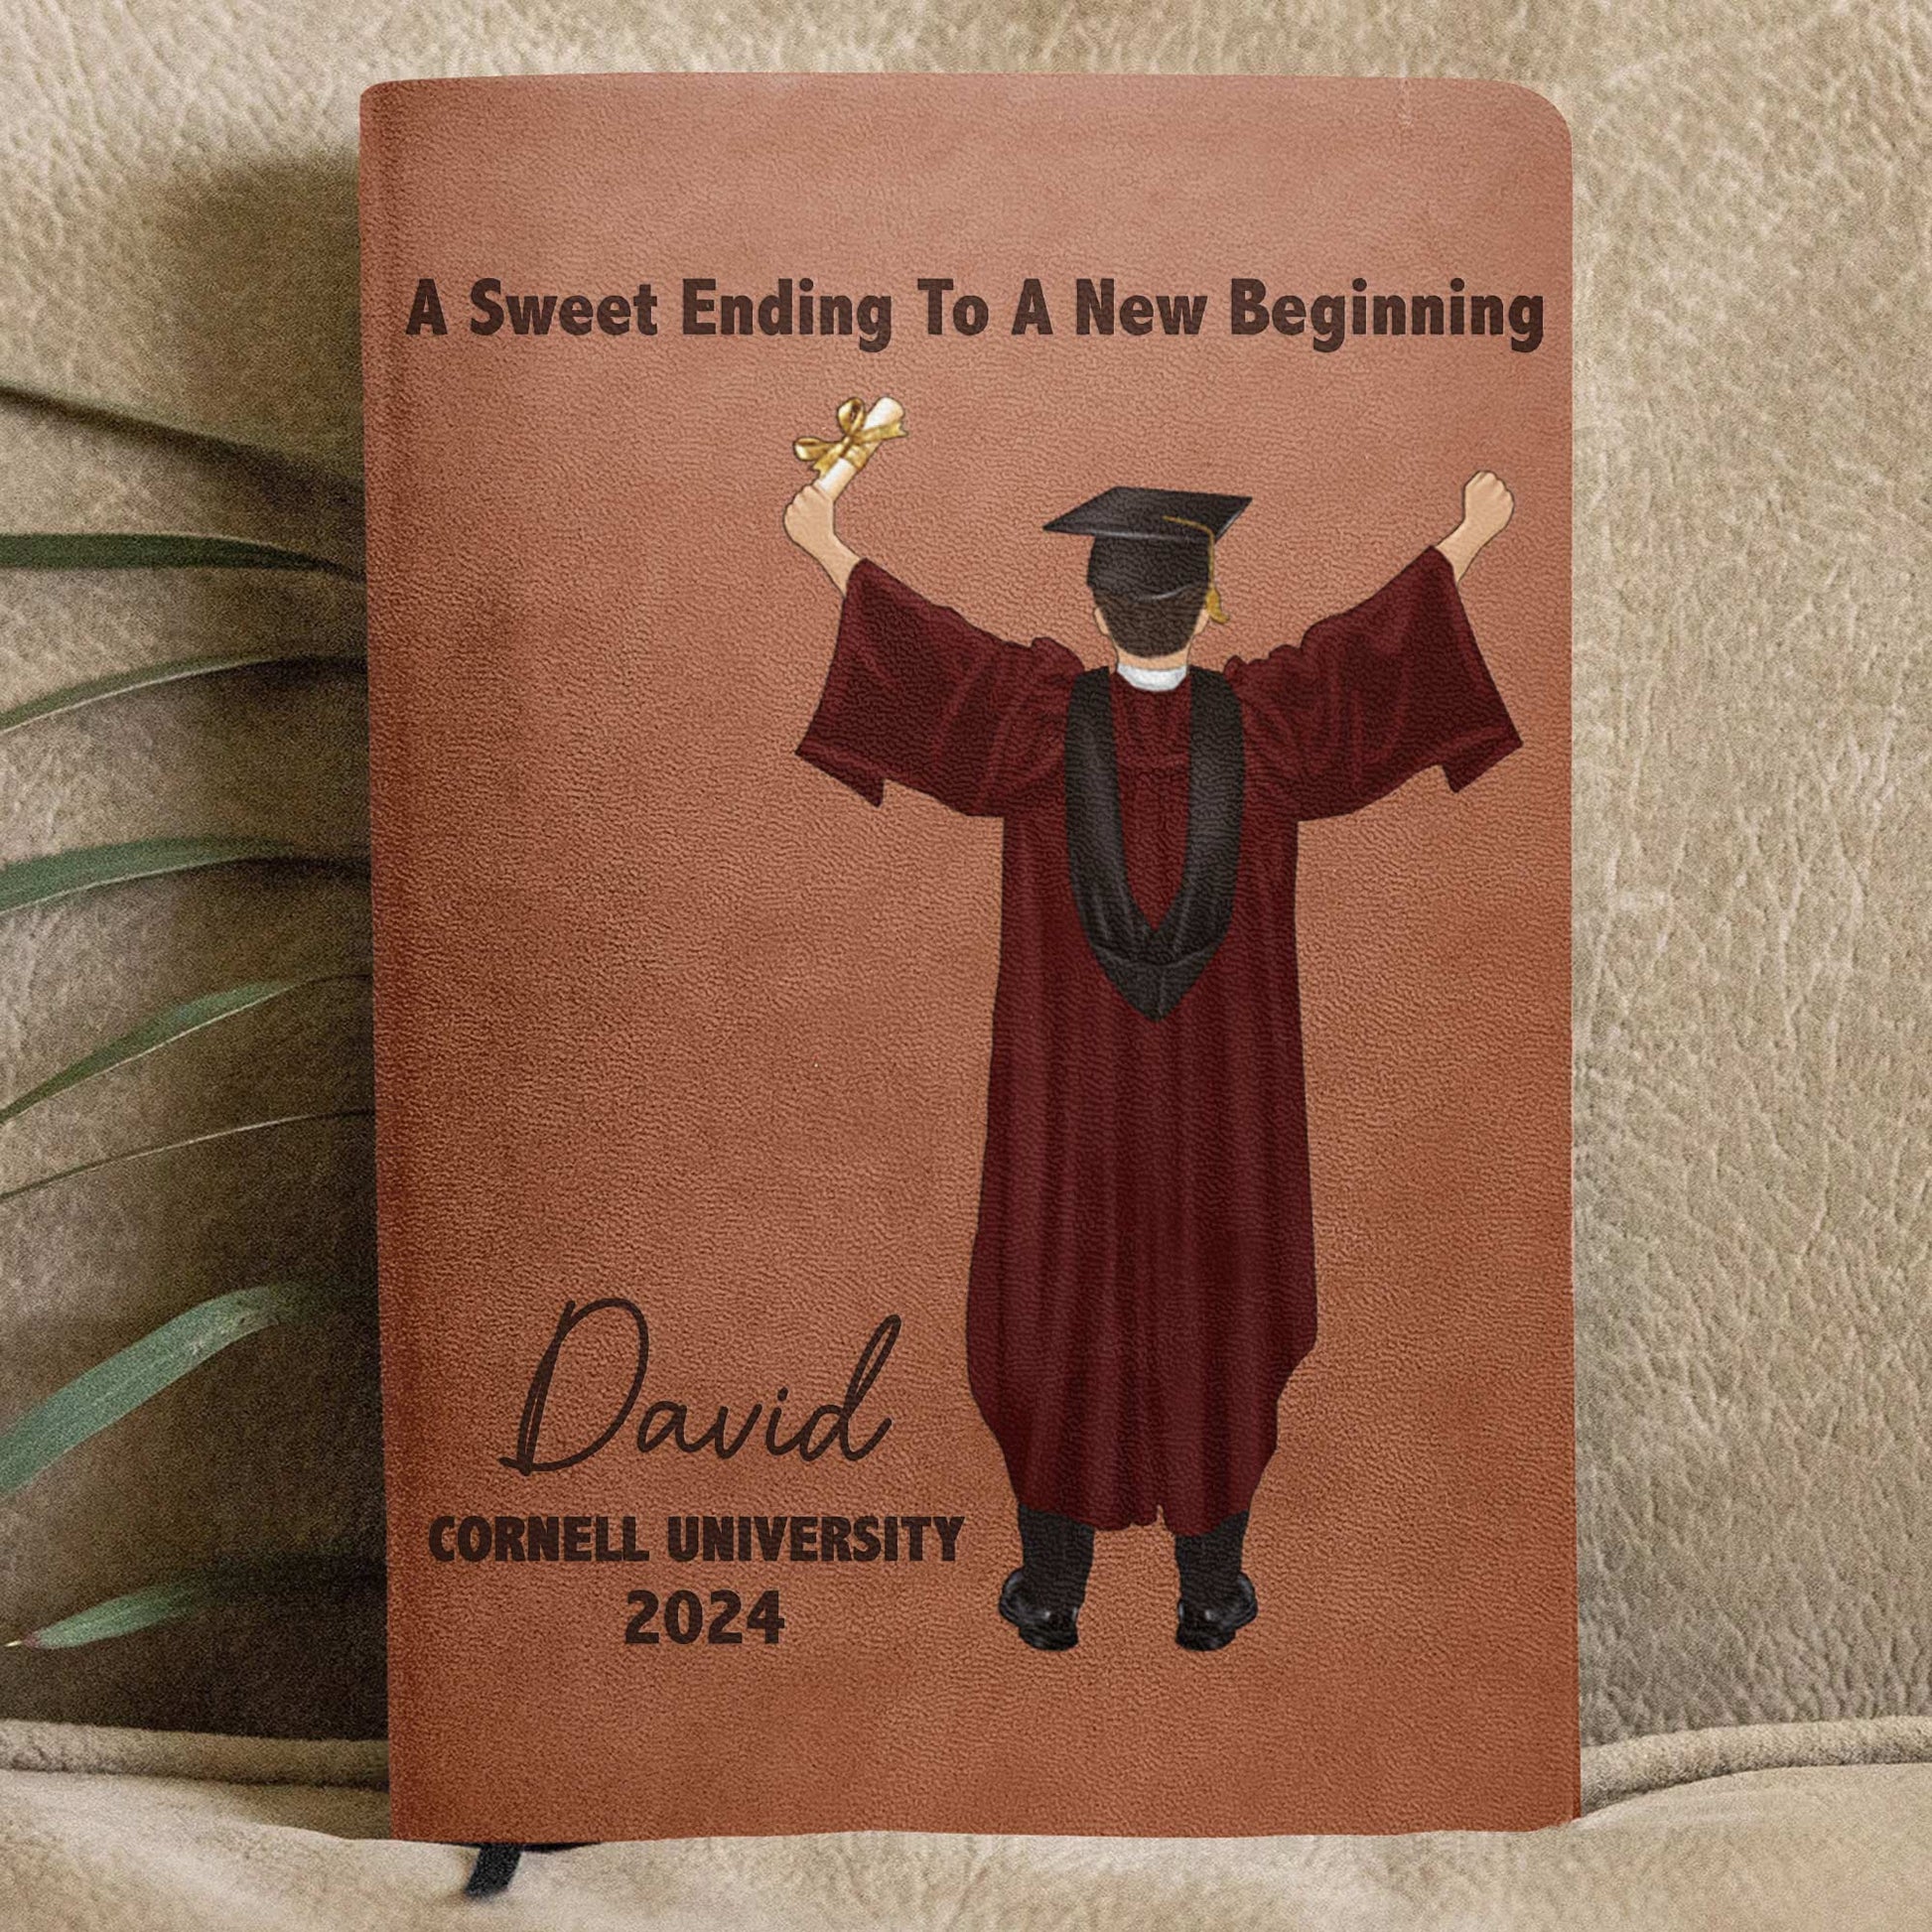 Graduation Journal He Believed He Could So He Did! - Personalized Leather Journal